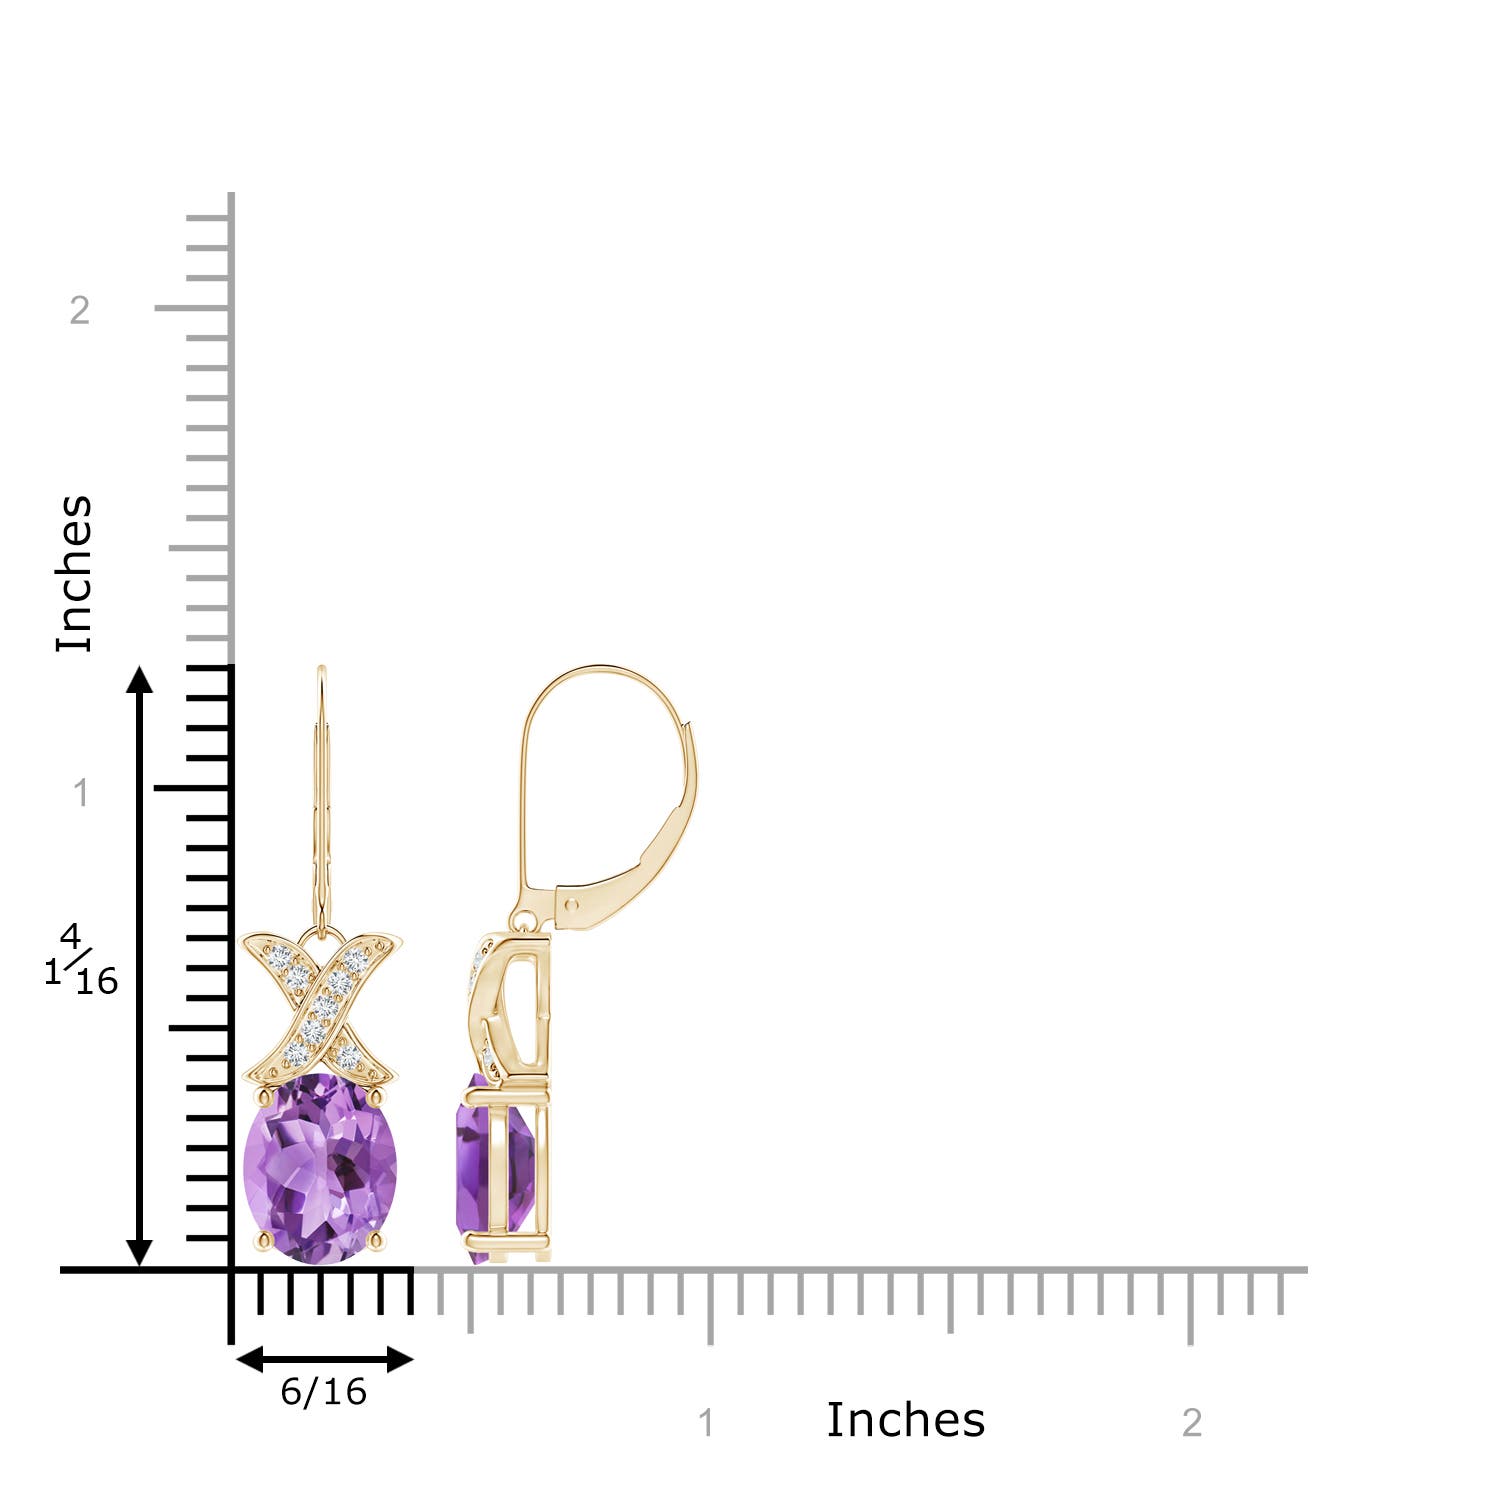 A - Amethyst / 4.69 CT / 14 KT Yellow Gold